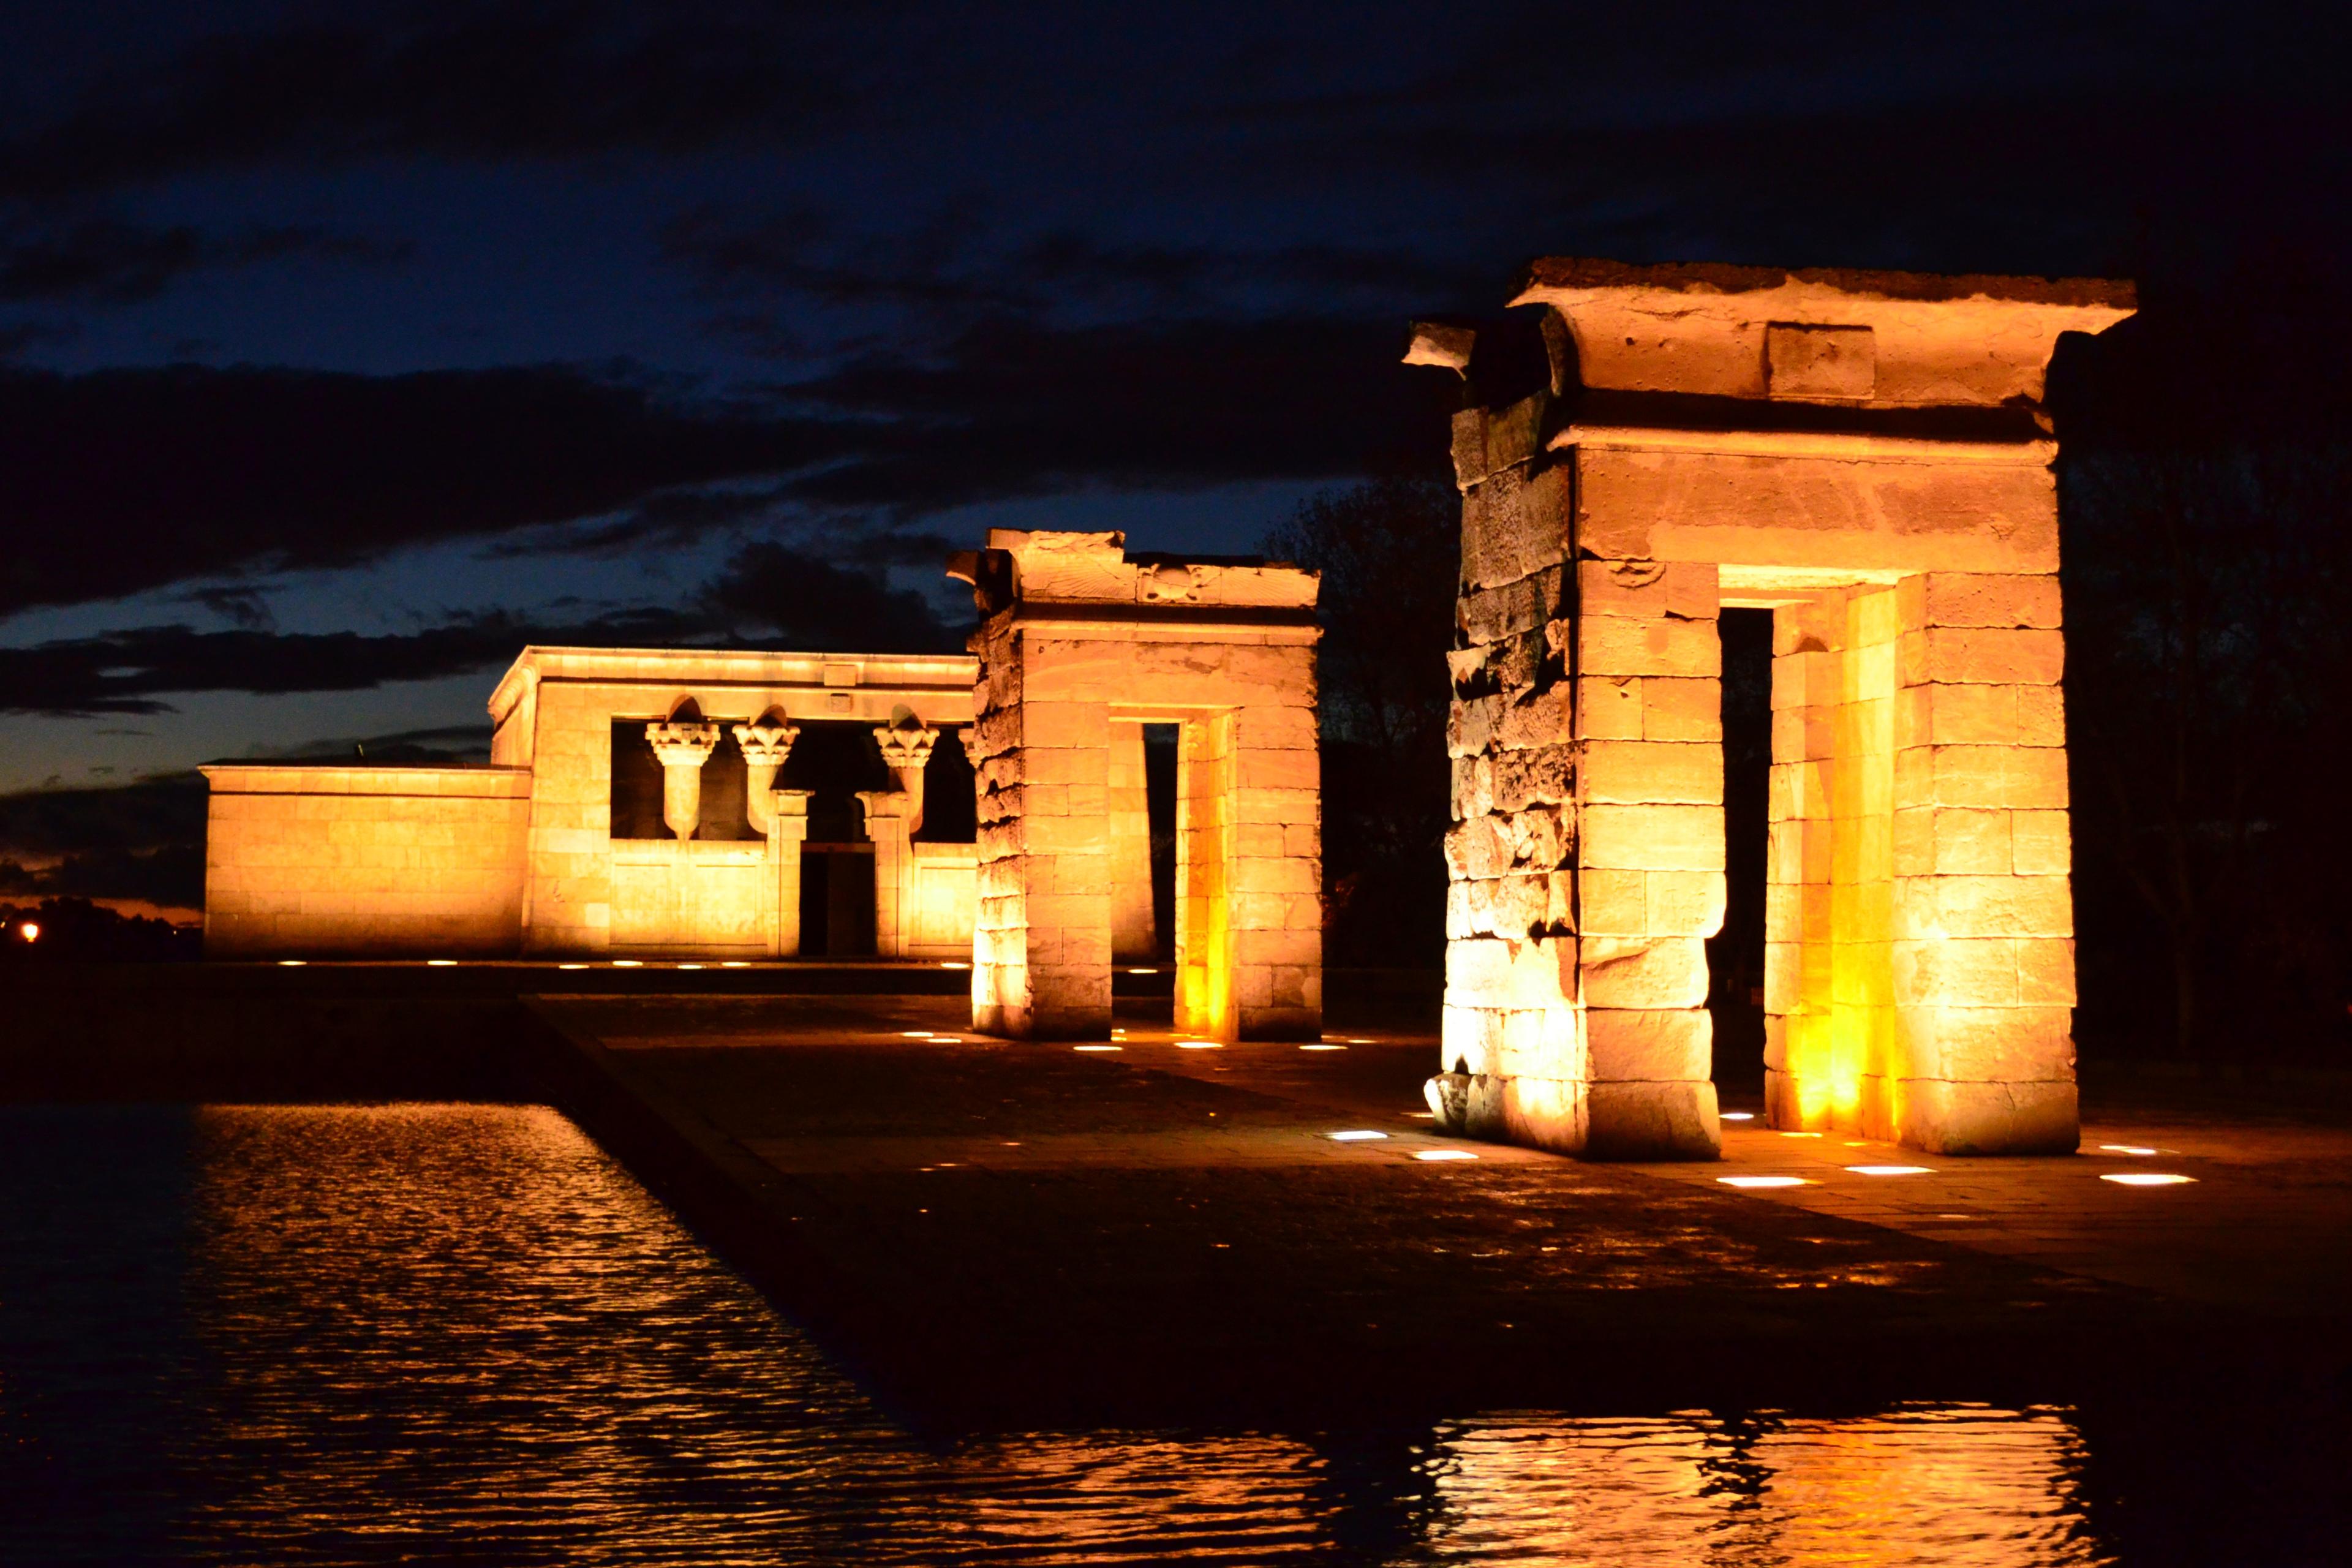 Cover image of this place Templo de Debod